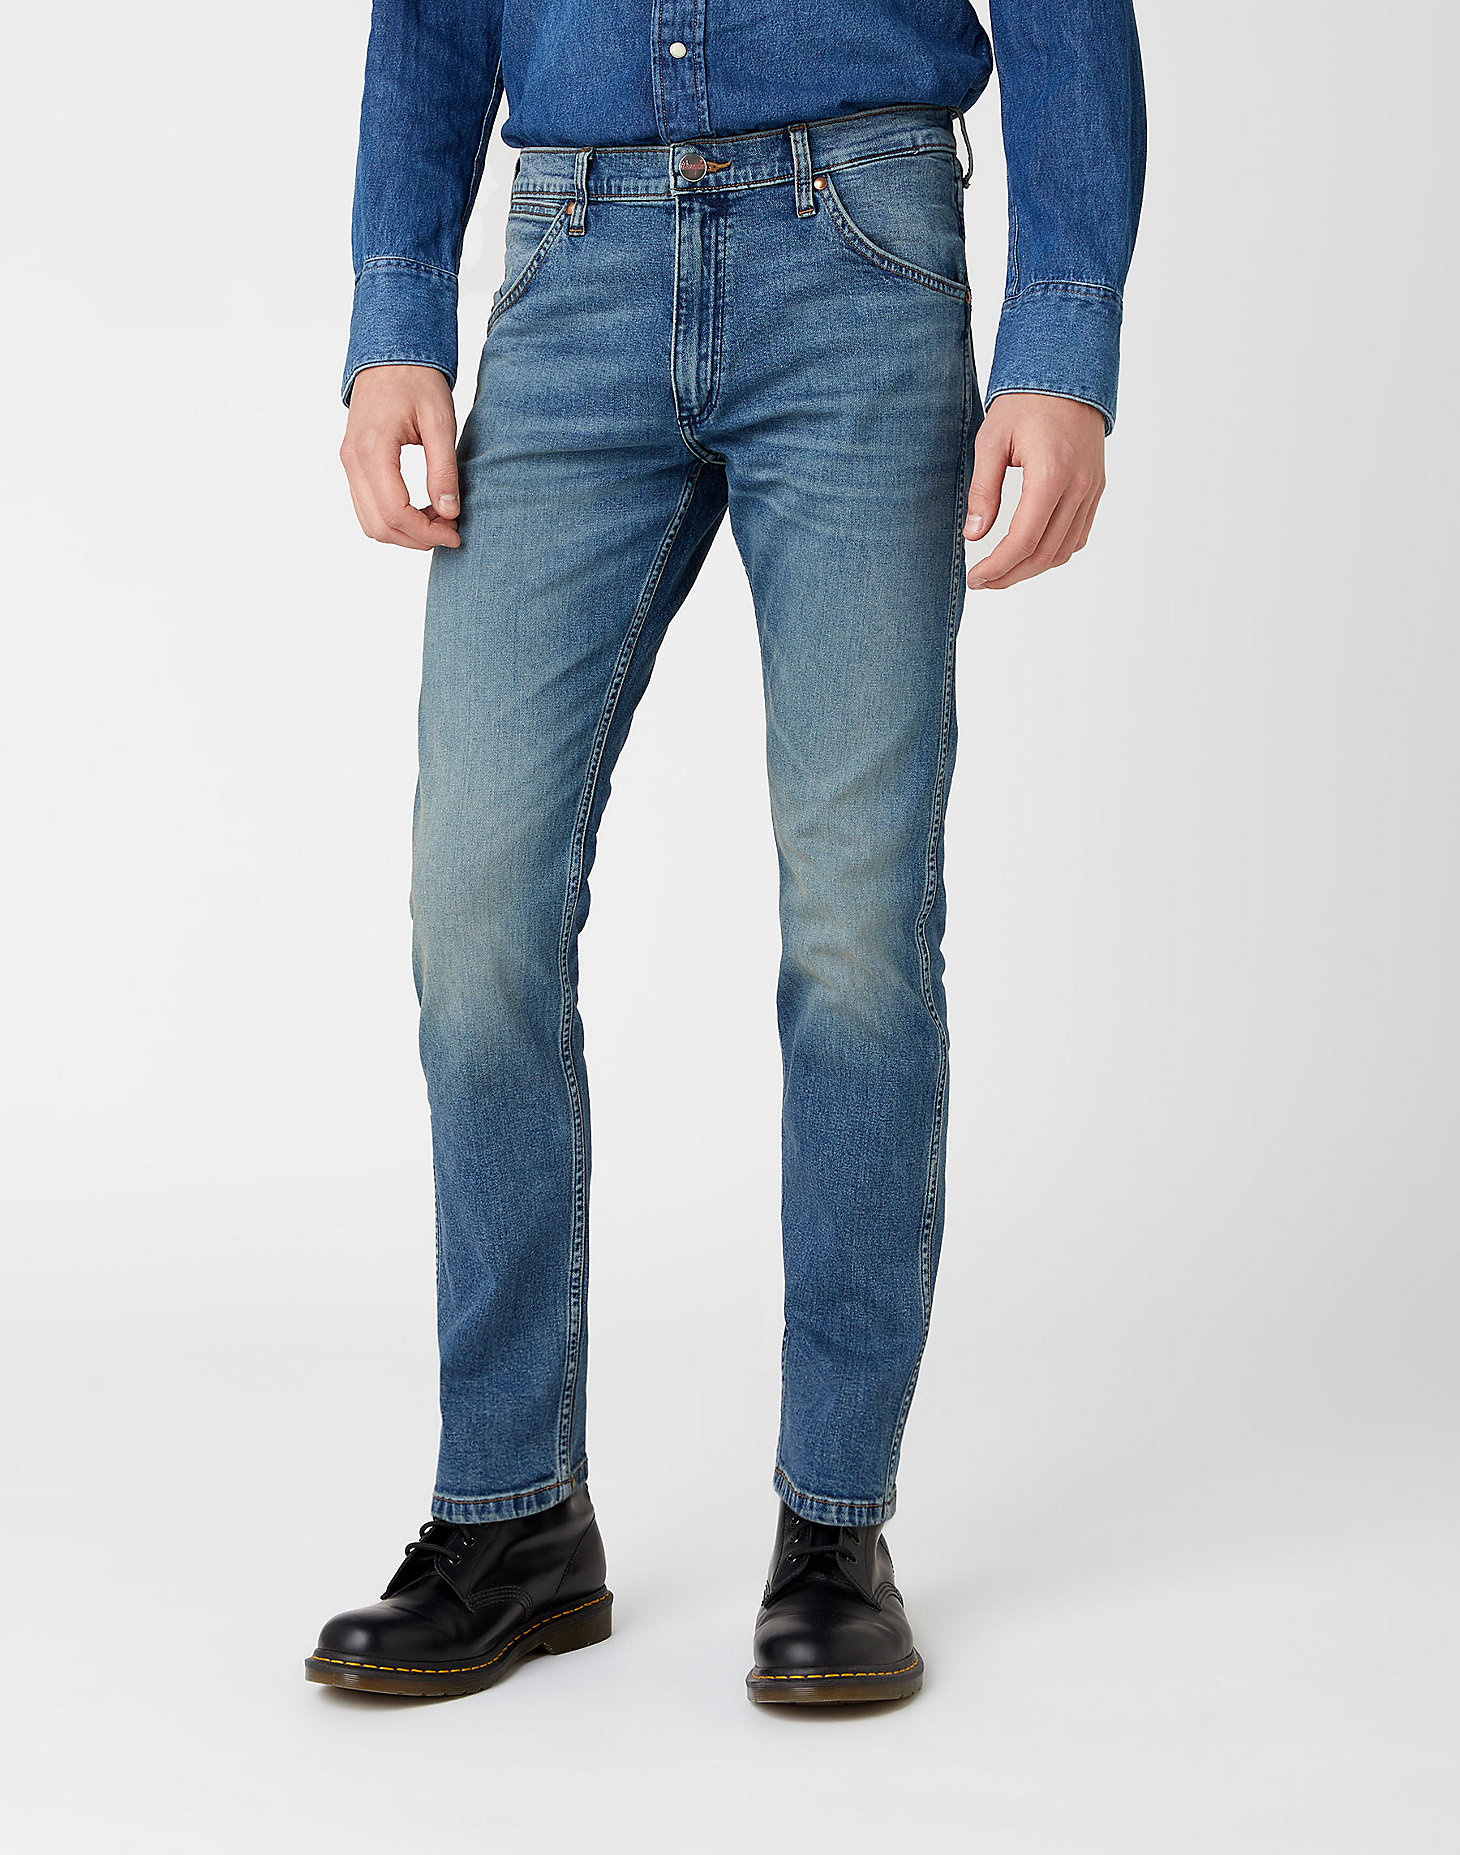 Indigood Icons 11MWZ Western Slim Jeans in Dust Bowl alternative view 1